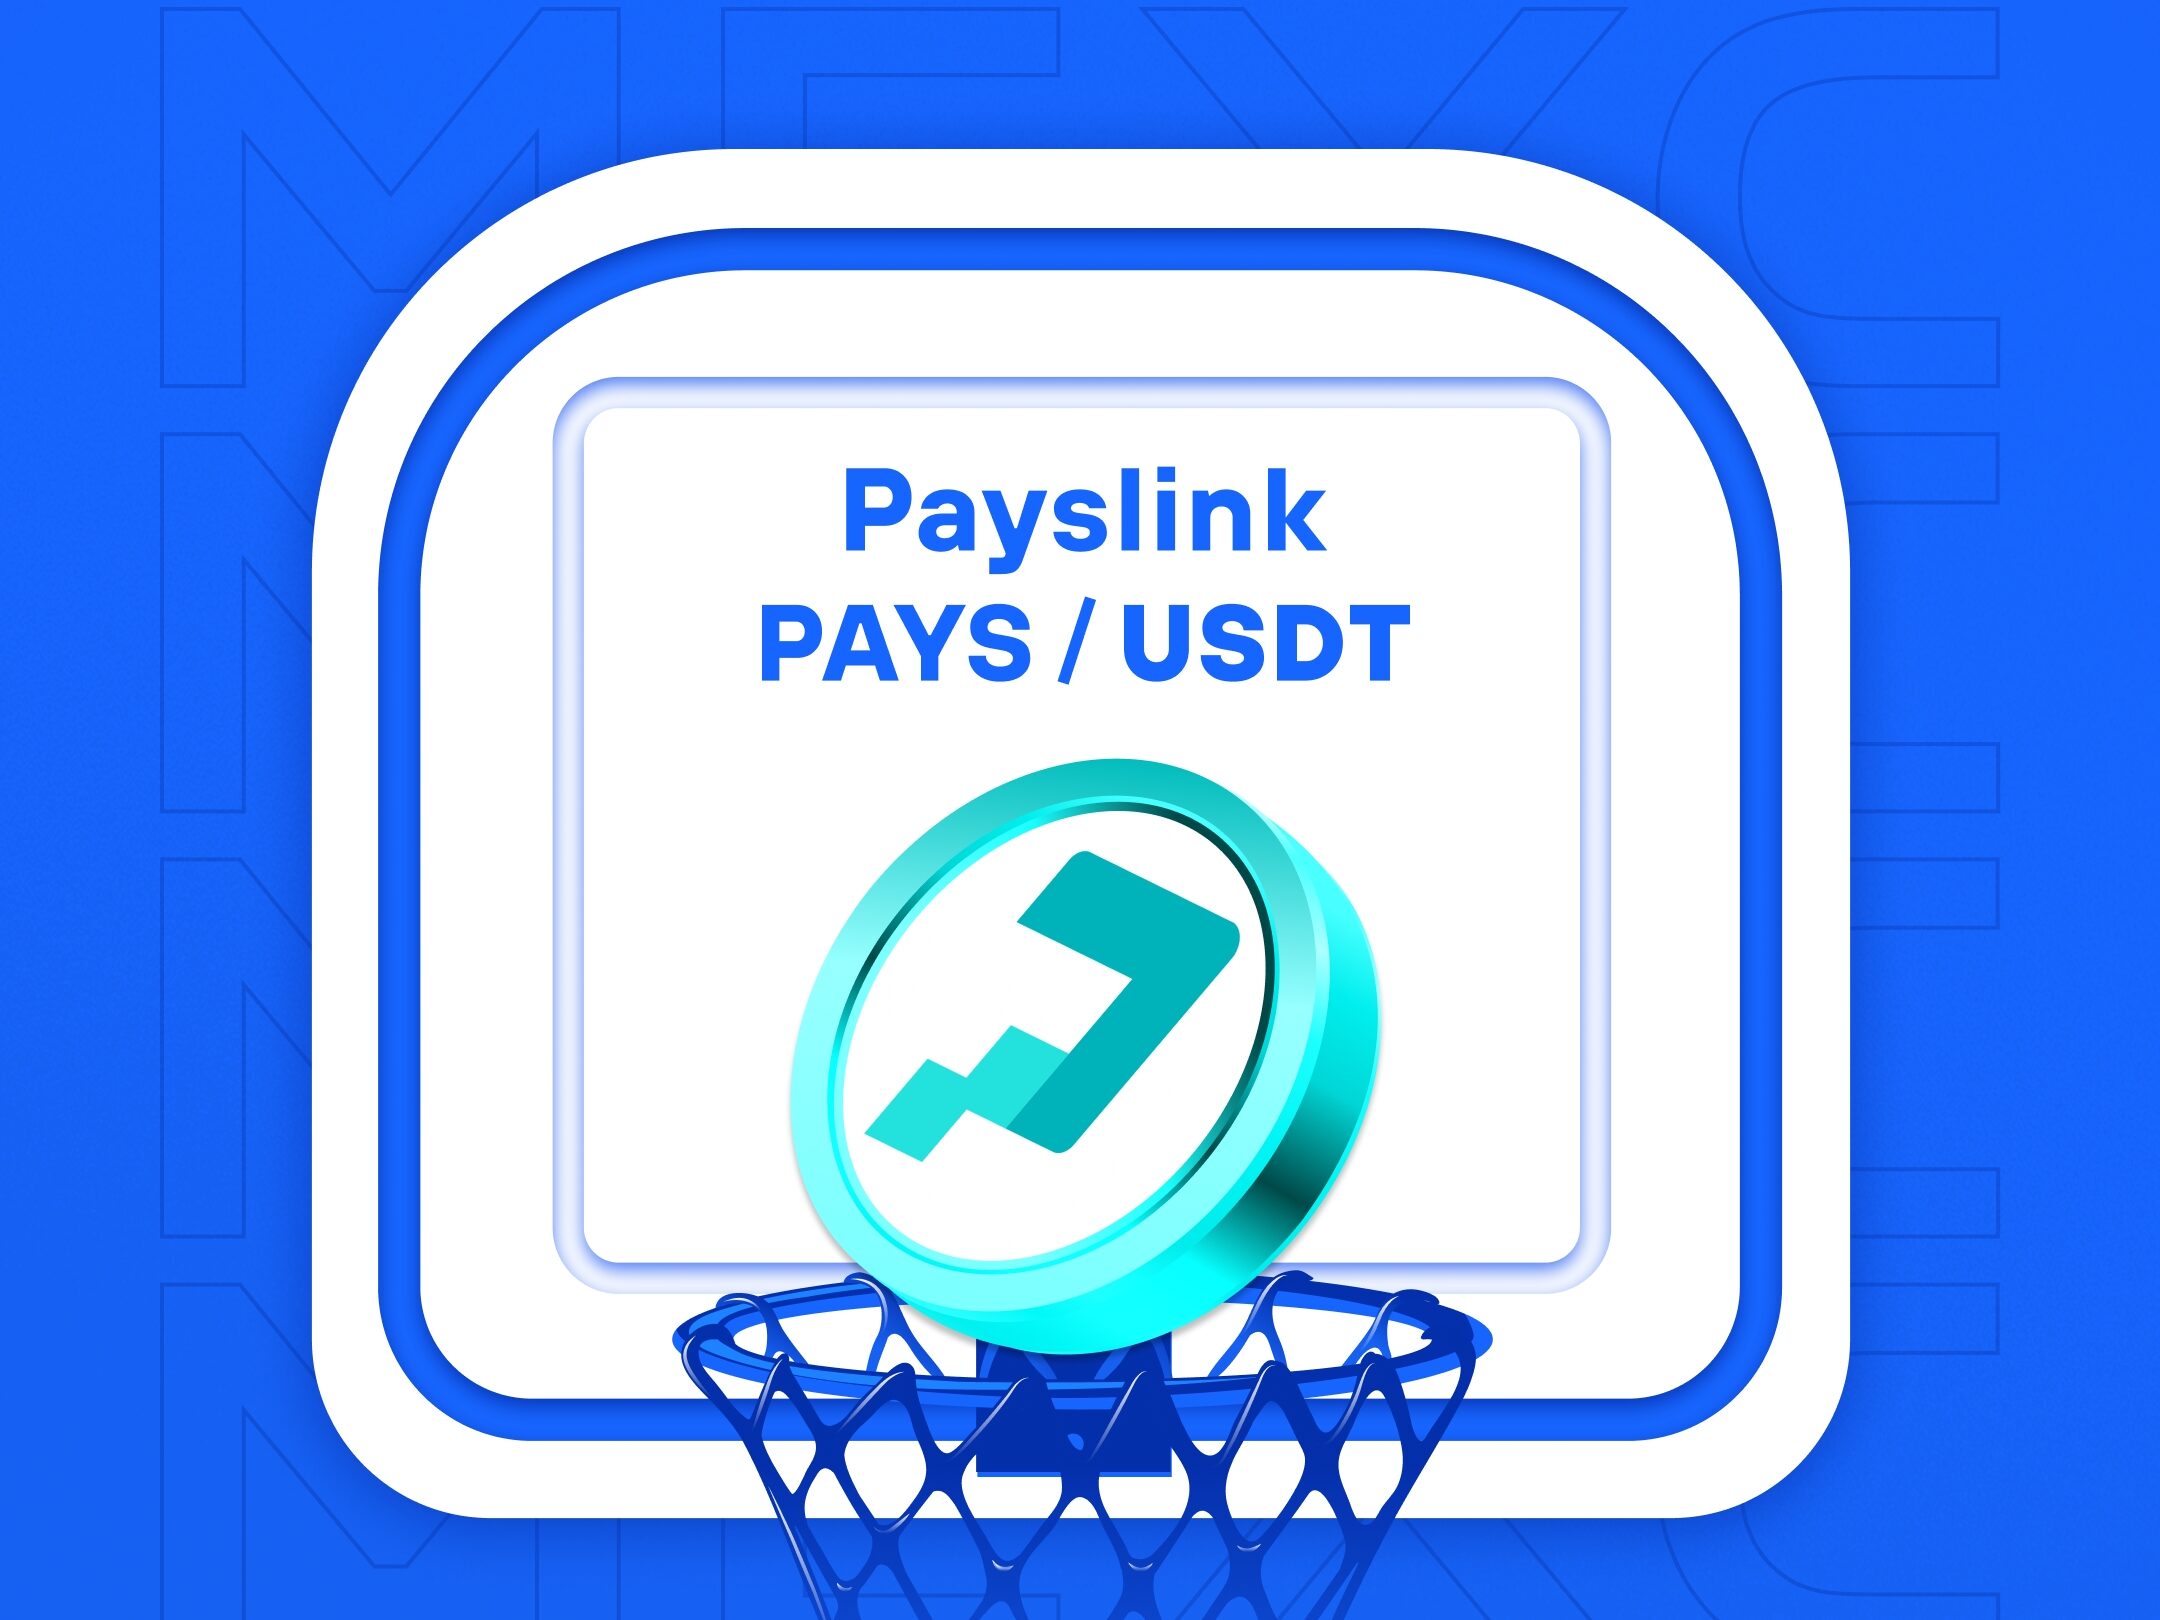 What is Payslink - All-In-One Solution For Financing and Payment (PAYS)